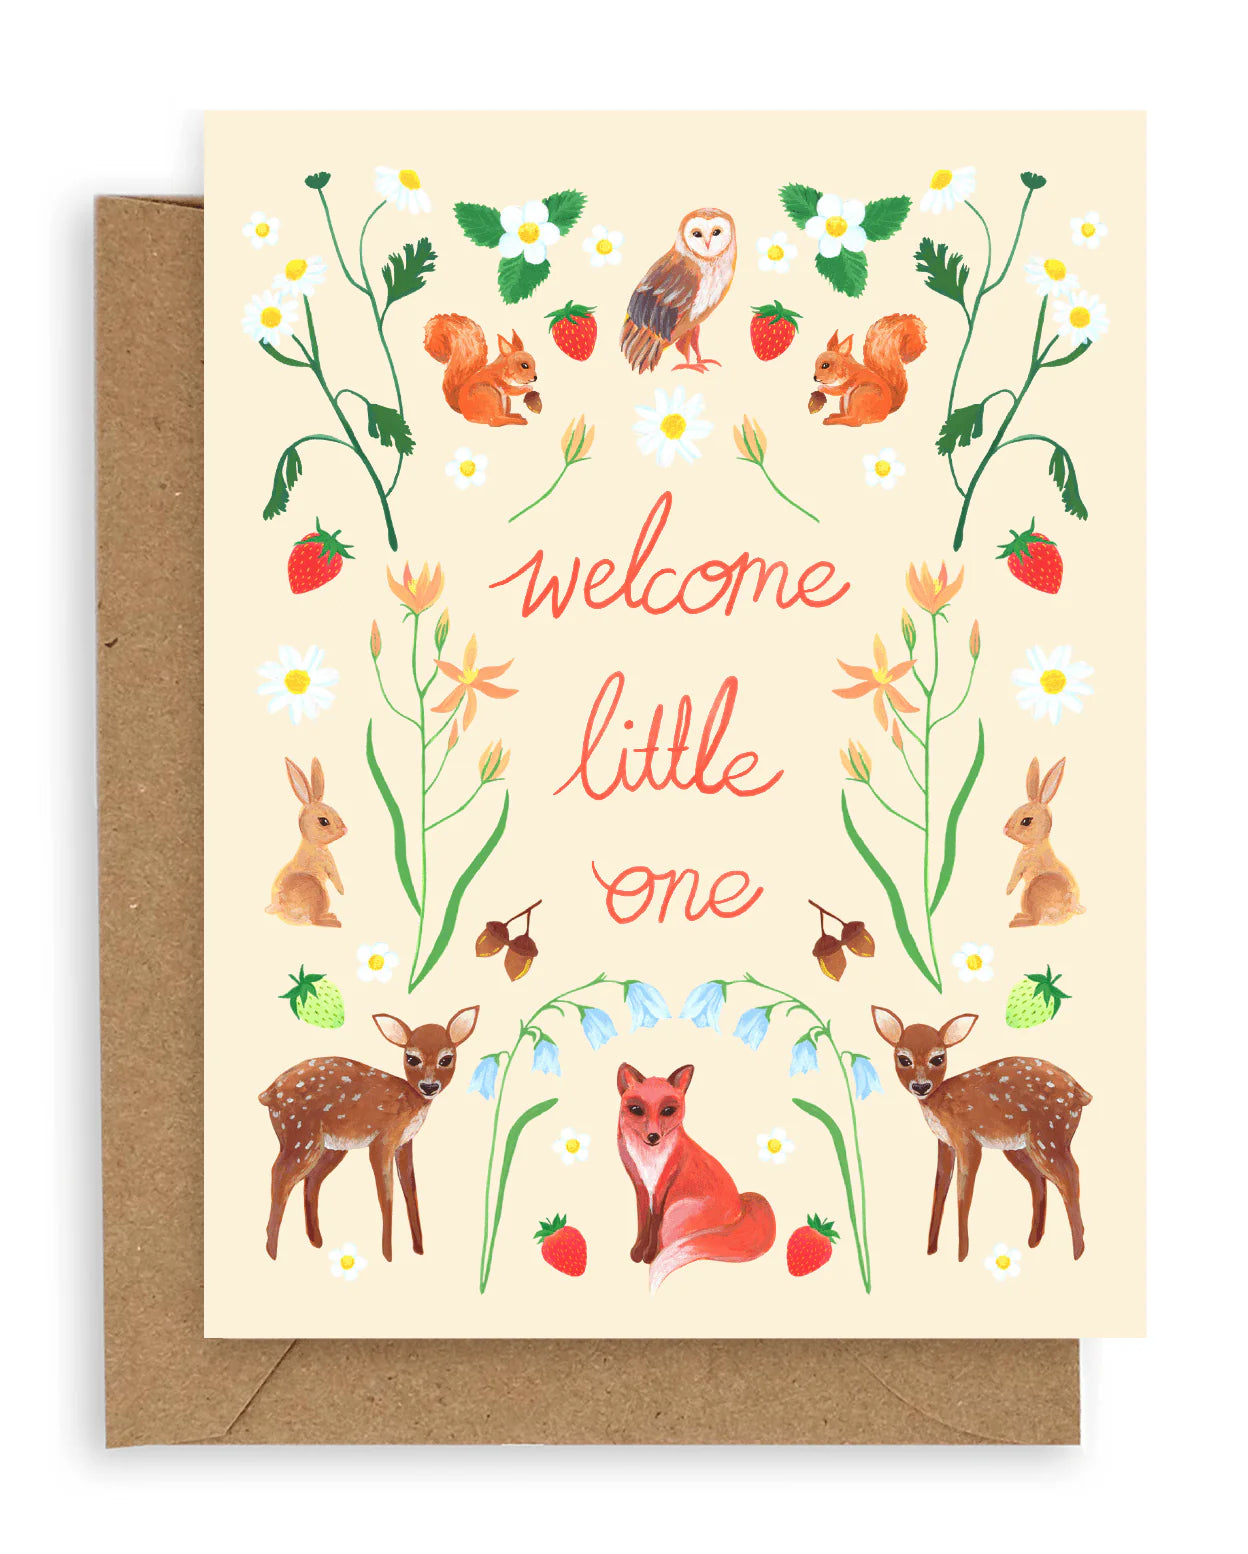 Welcome little one blank greeting card